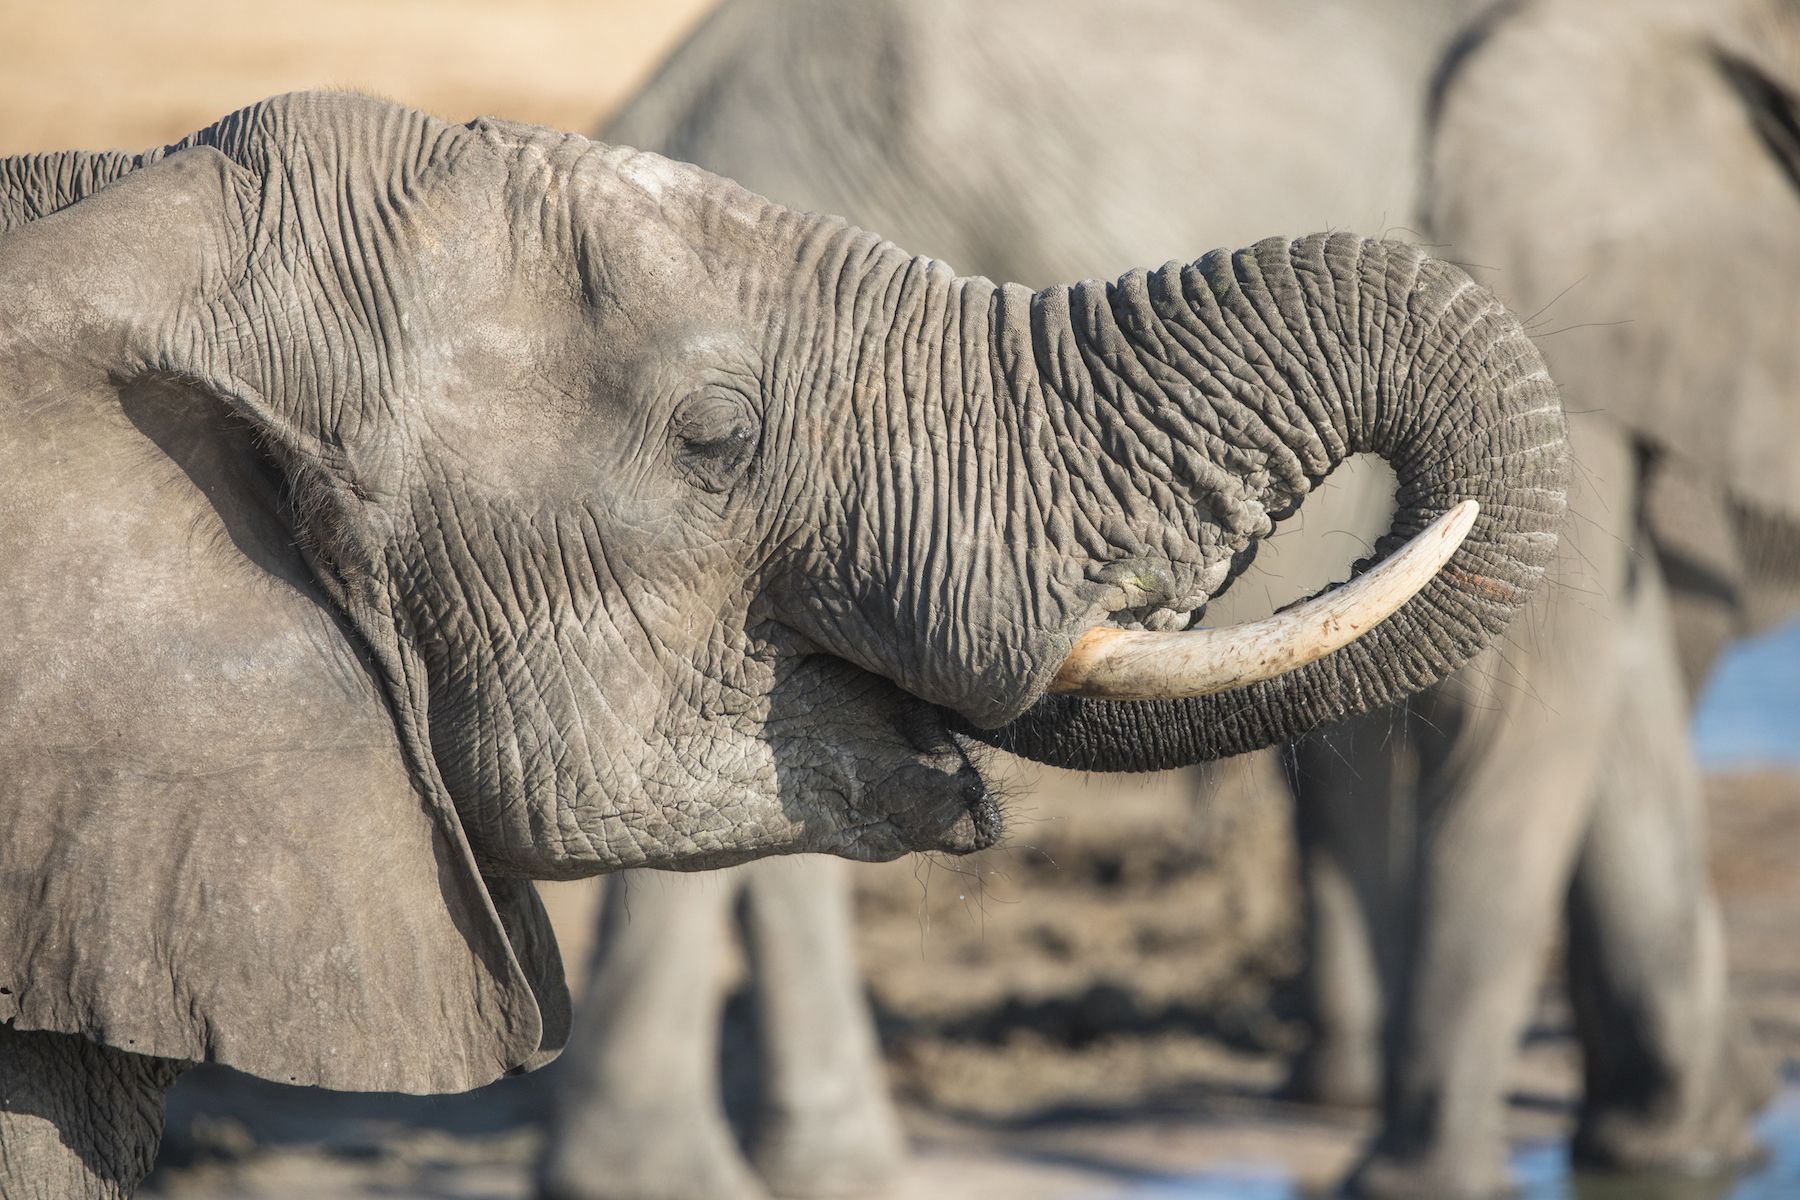 An African Elephant drinking at the Chobe River in northeastern Botswana